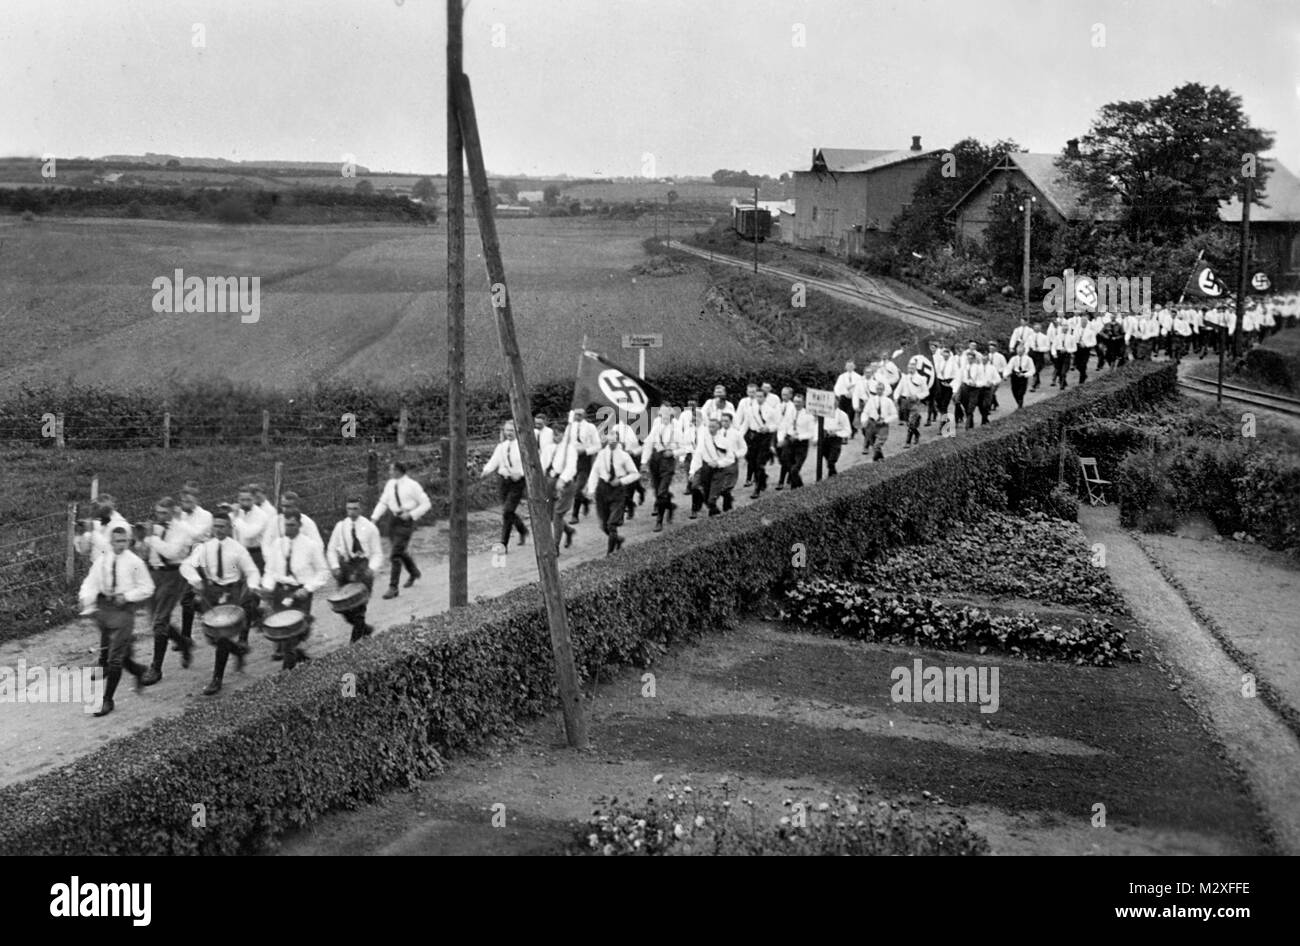 Hitler youth march through rural Germany in the mid-1930s. Stock Photo